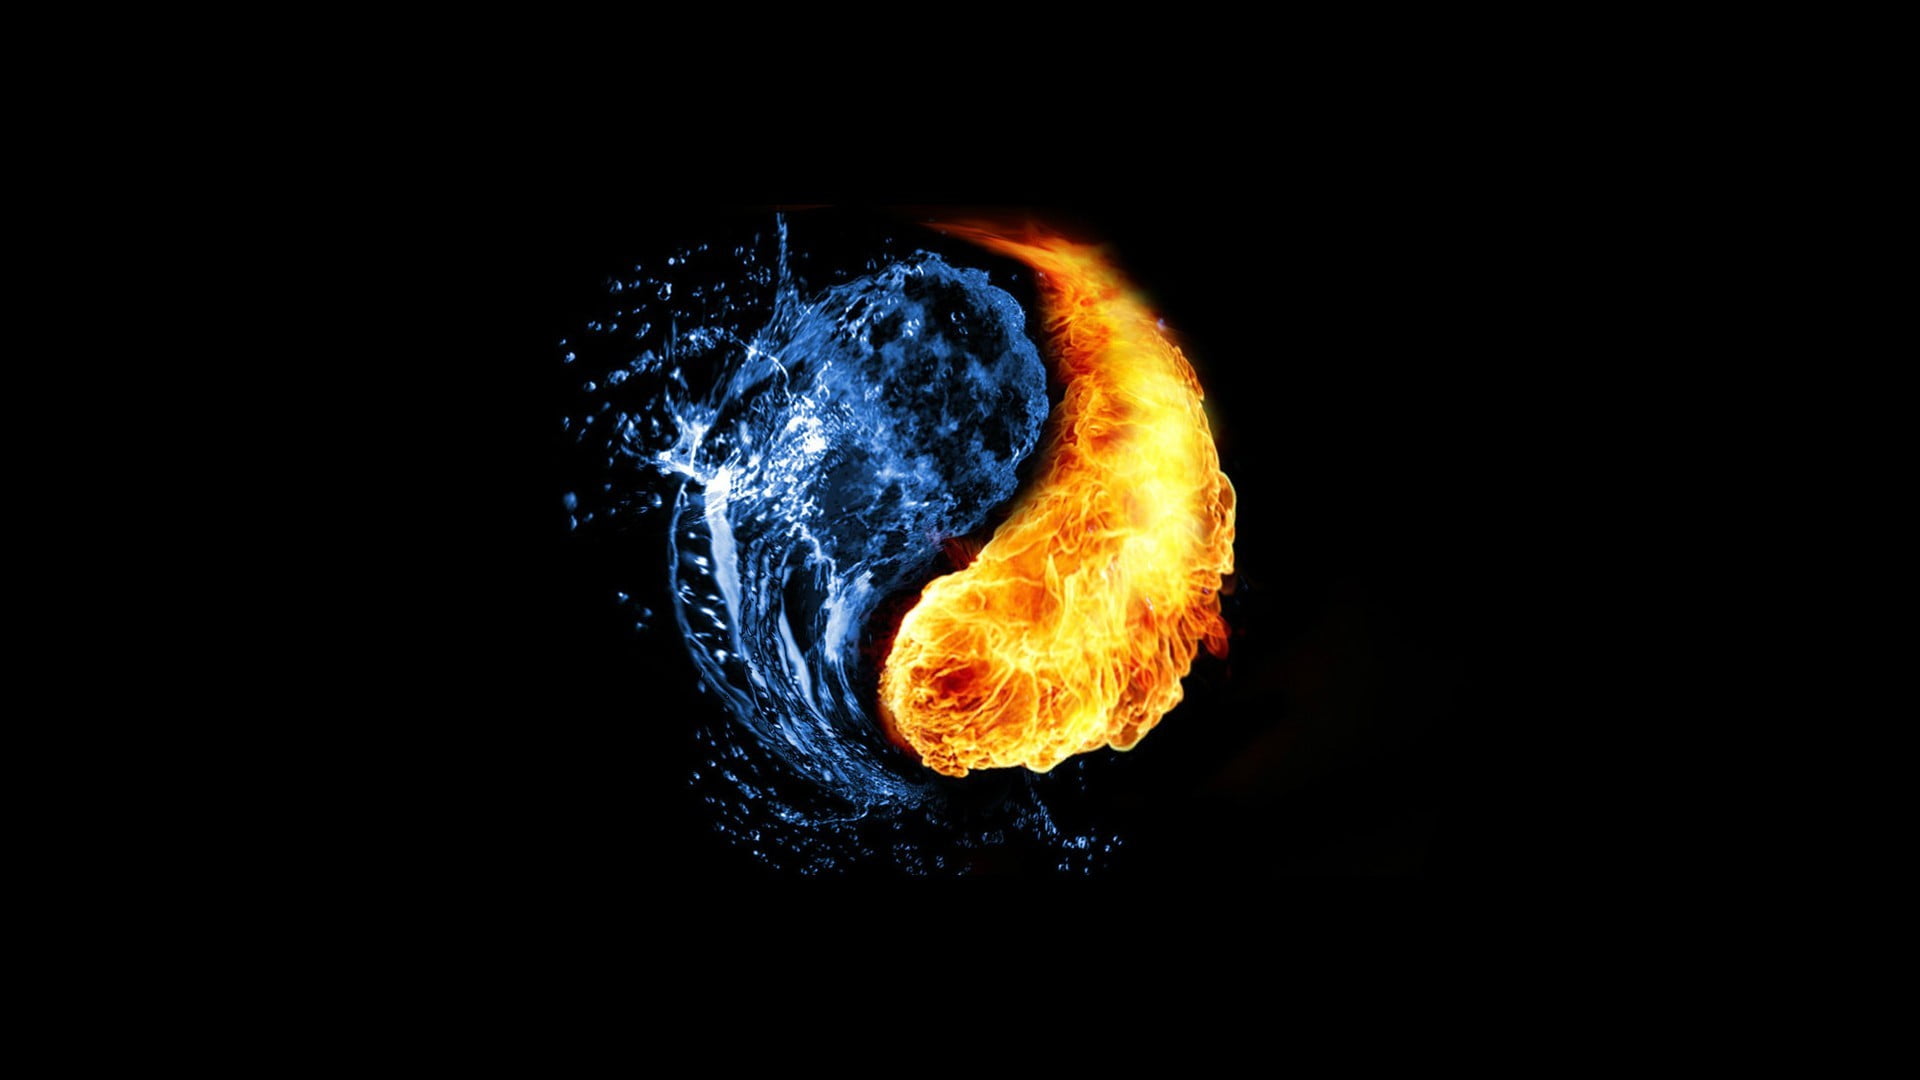 water and fire-themed yin yang symbol